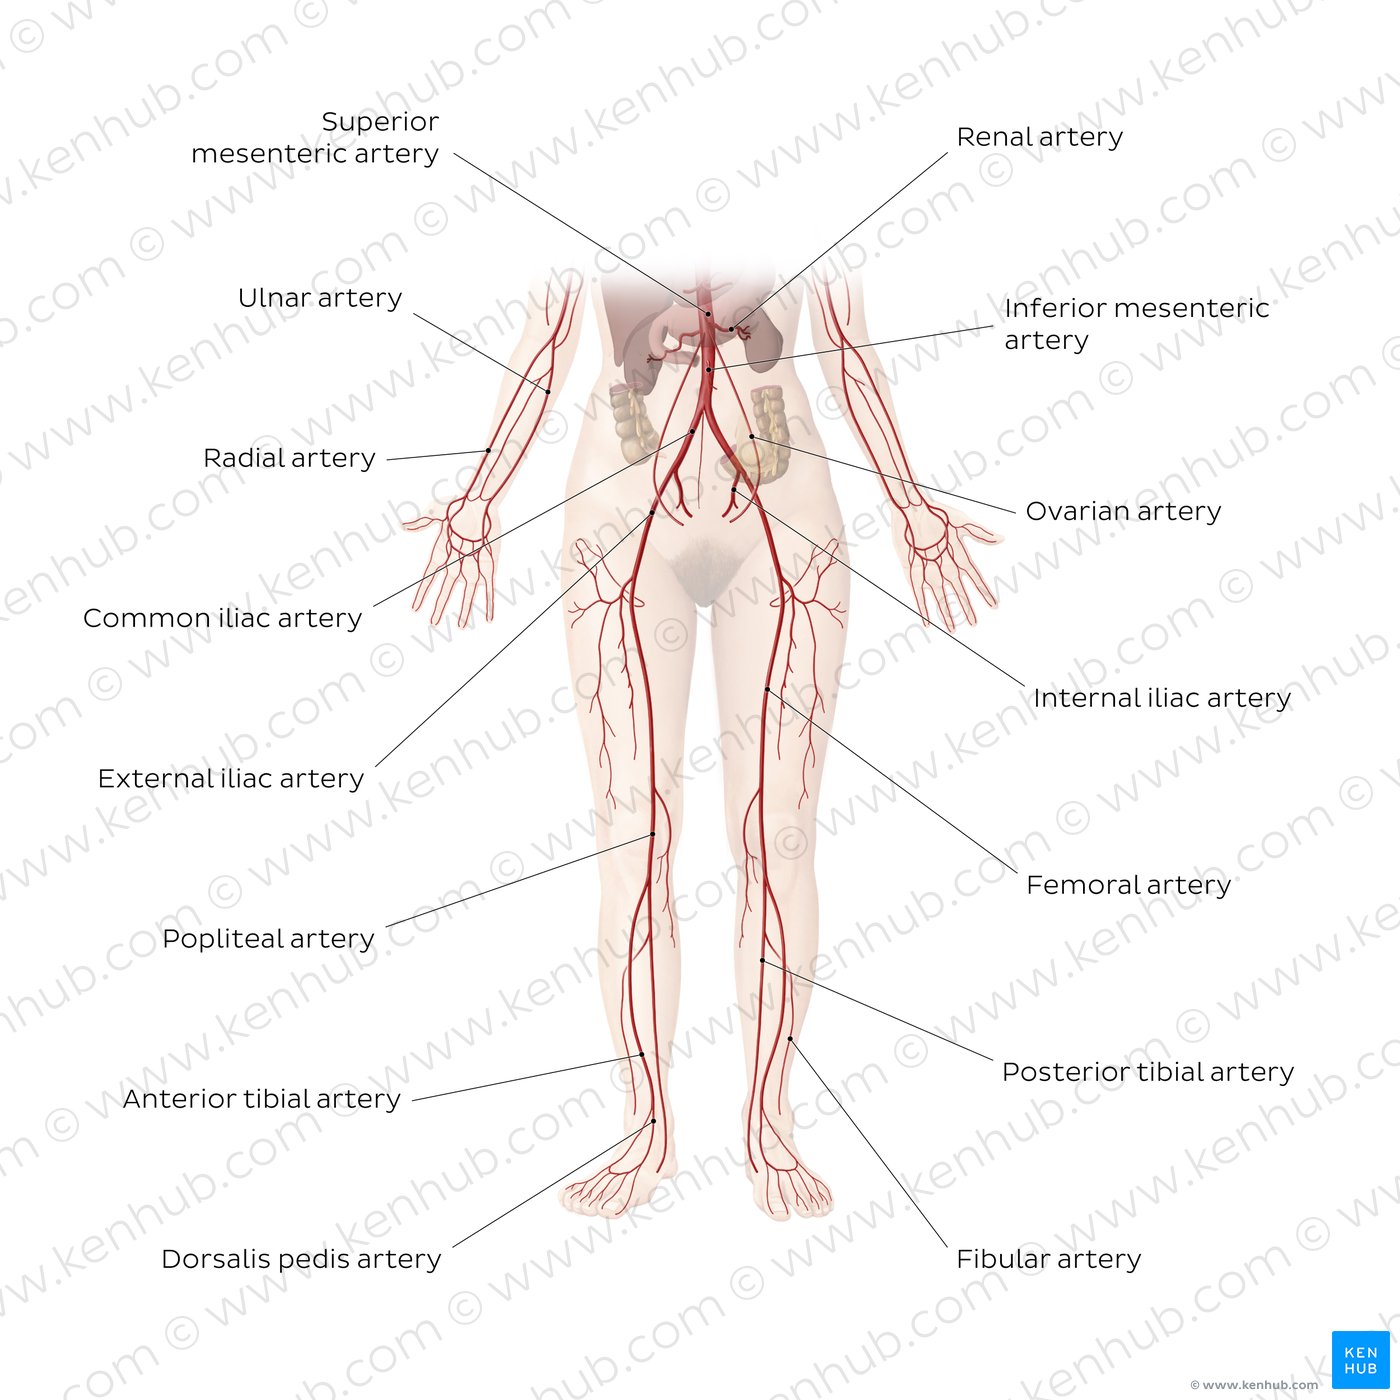 Cardiovascular system: Arteries of the lower part of the body